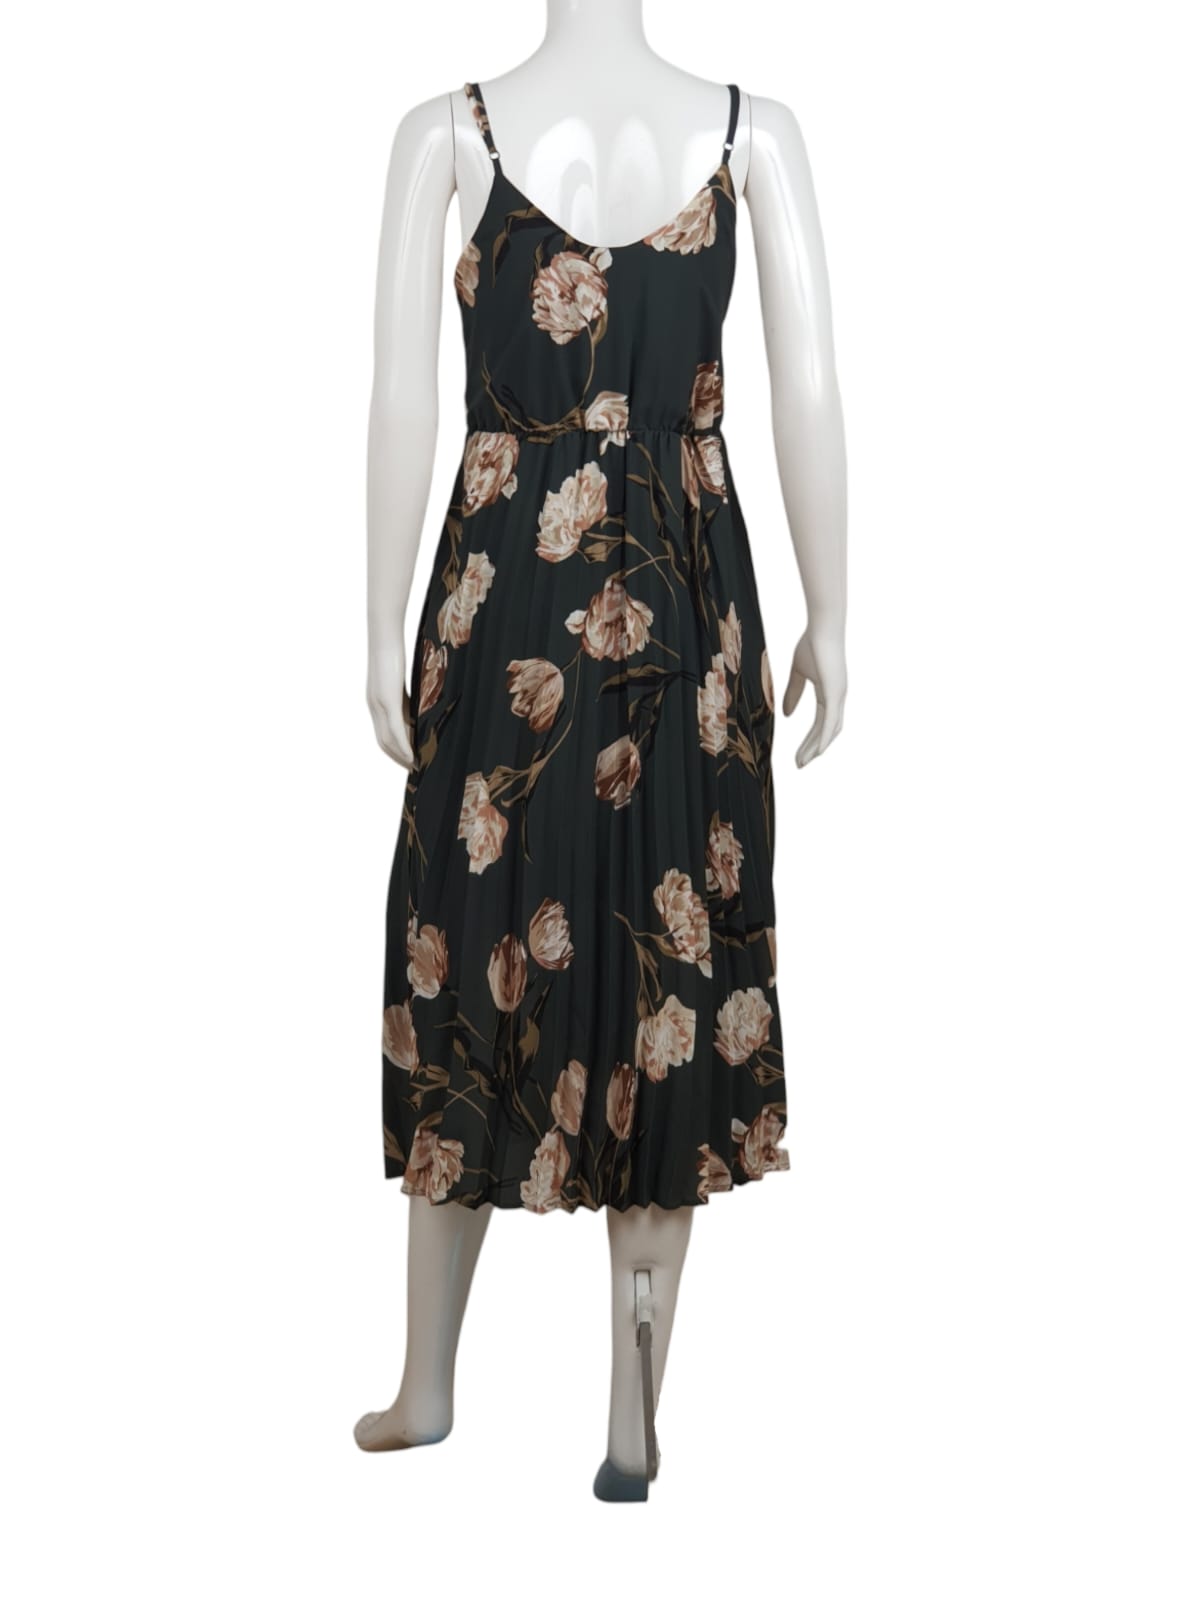 A . New Day Black Floral Pleated Dress (M)